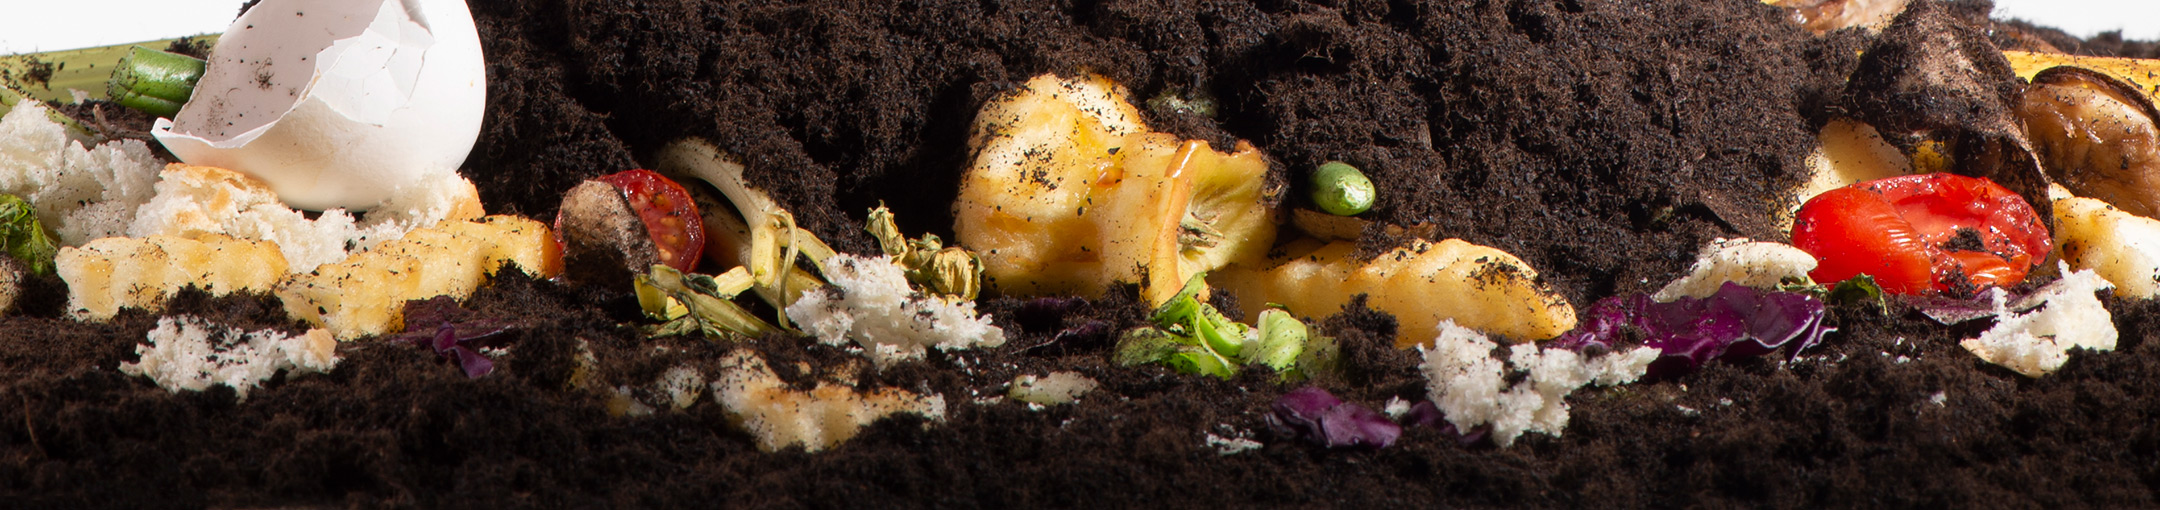 Food waste scraps and dirt.